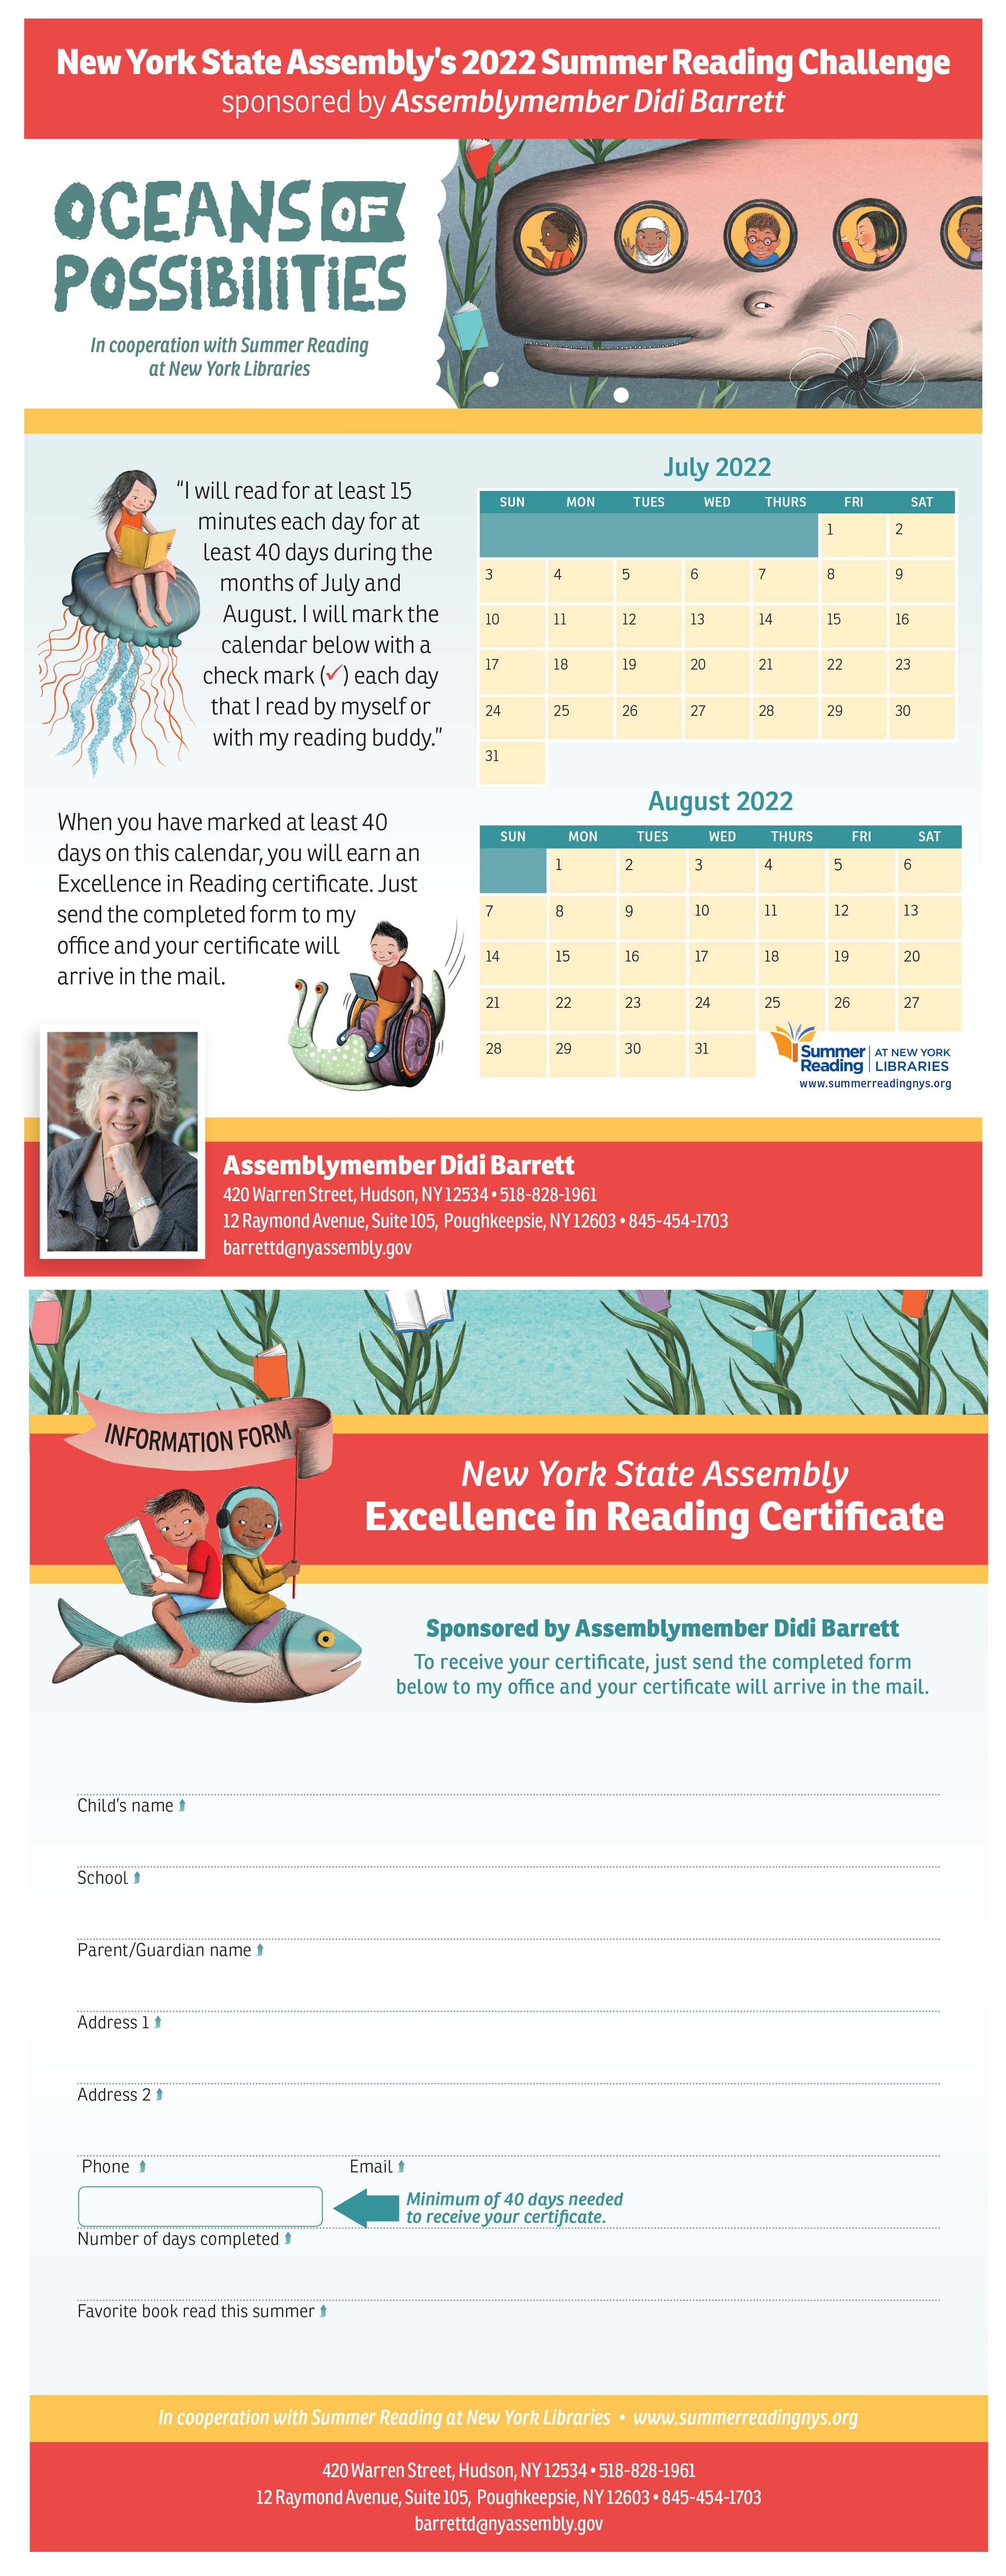 NYS Assembly's 2022 Summer Reading Challenge Calendar